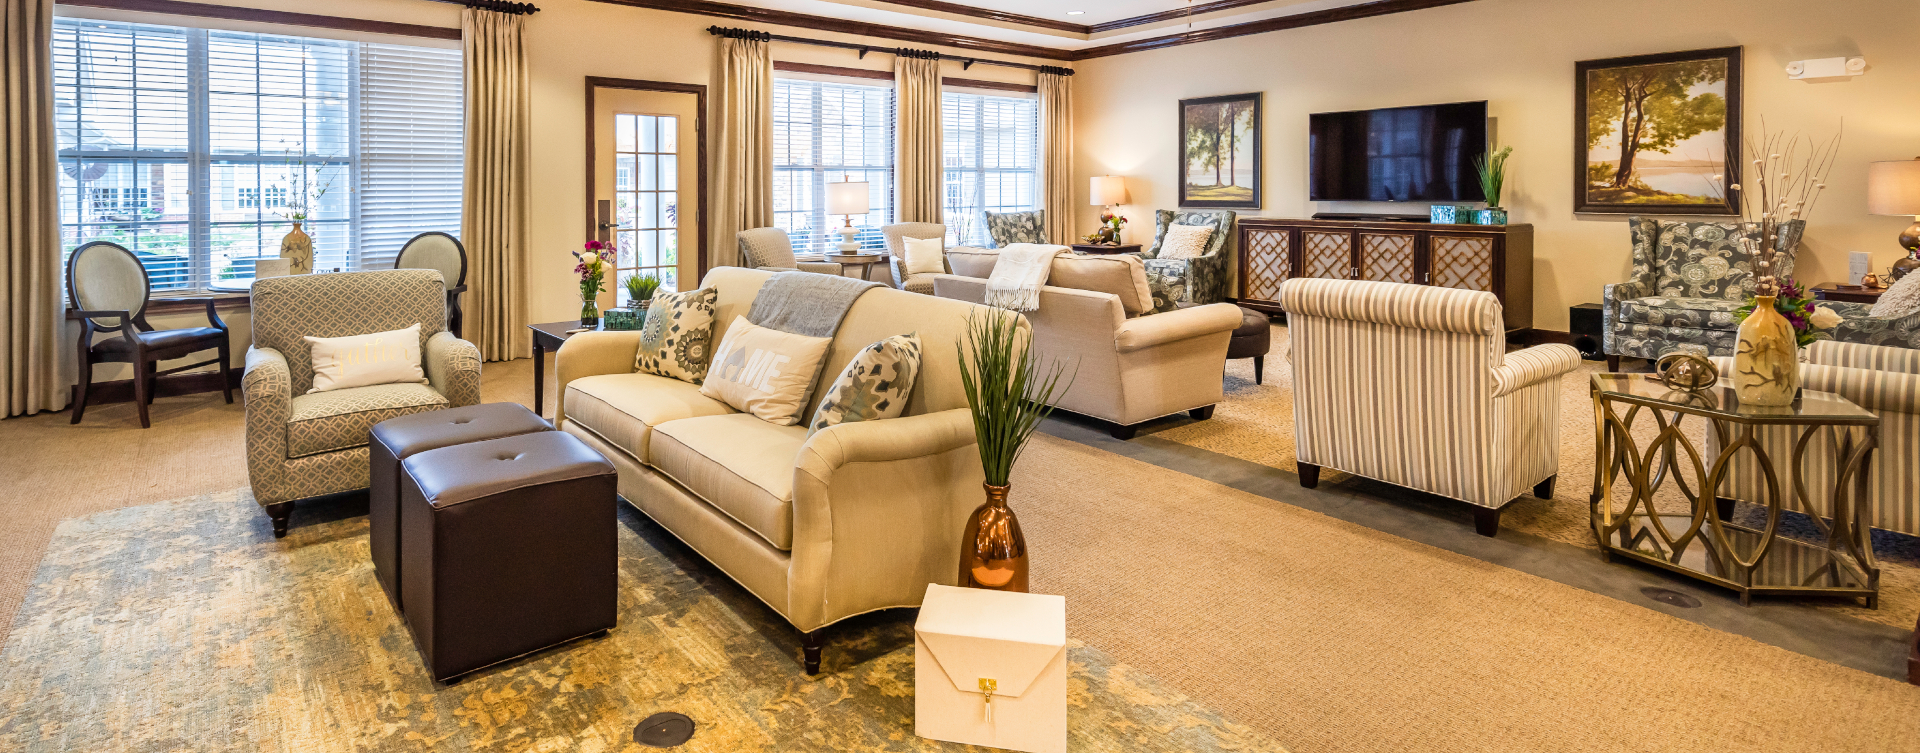 Enjoy a good book in the living room at Bickford of Shelby Township